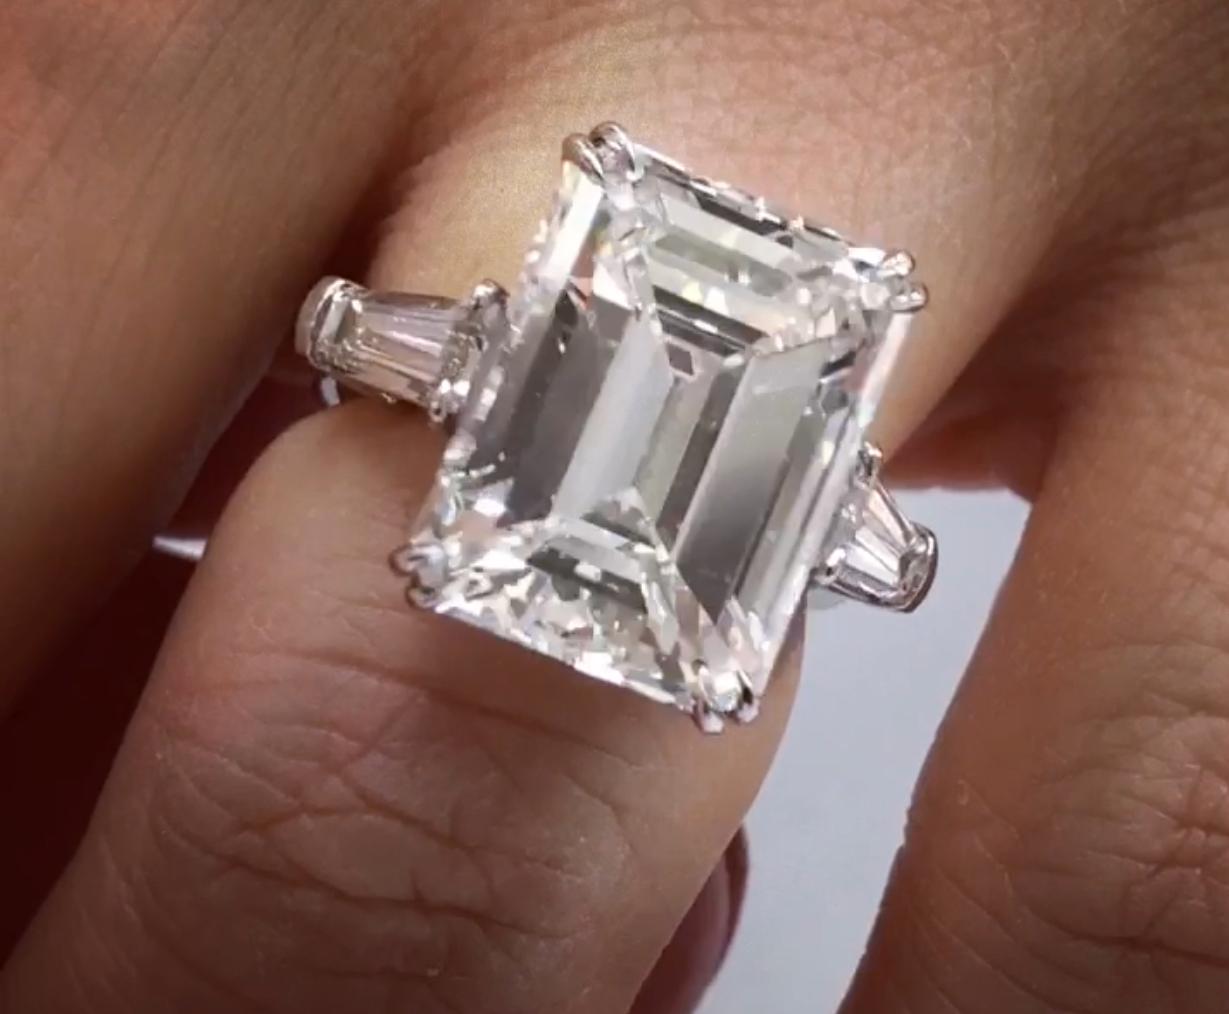 Platinum Three stone Emerald cut Diamond Ring.
The center stone is 11.34 Carats H Color VS1 in Clarity Emerald Cut, set with 1.38 Carats of Baguettes on each side. In Platinum 